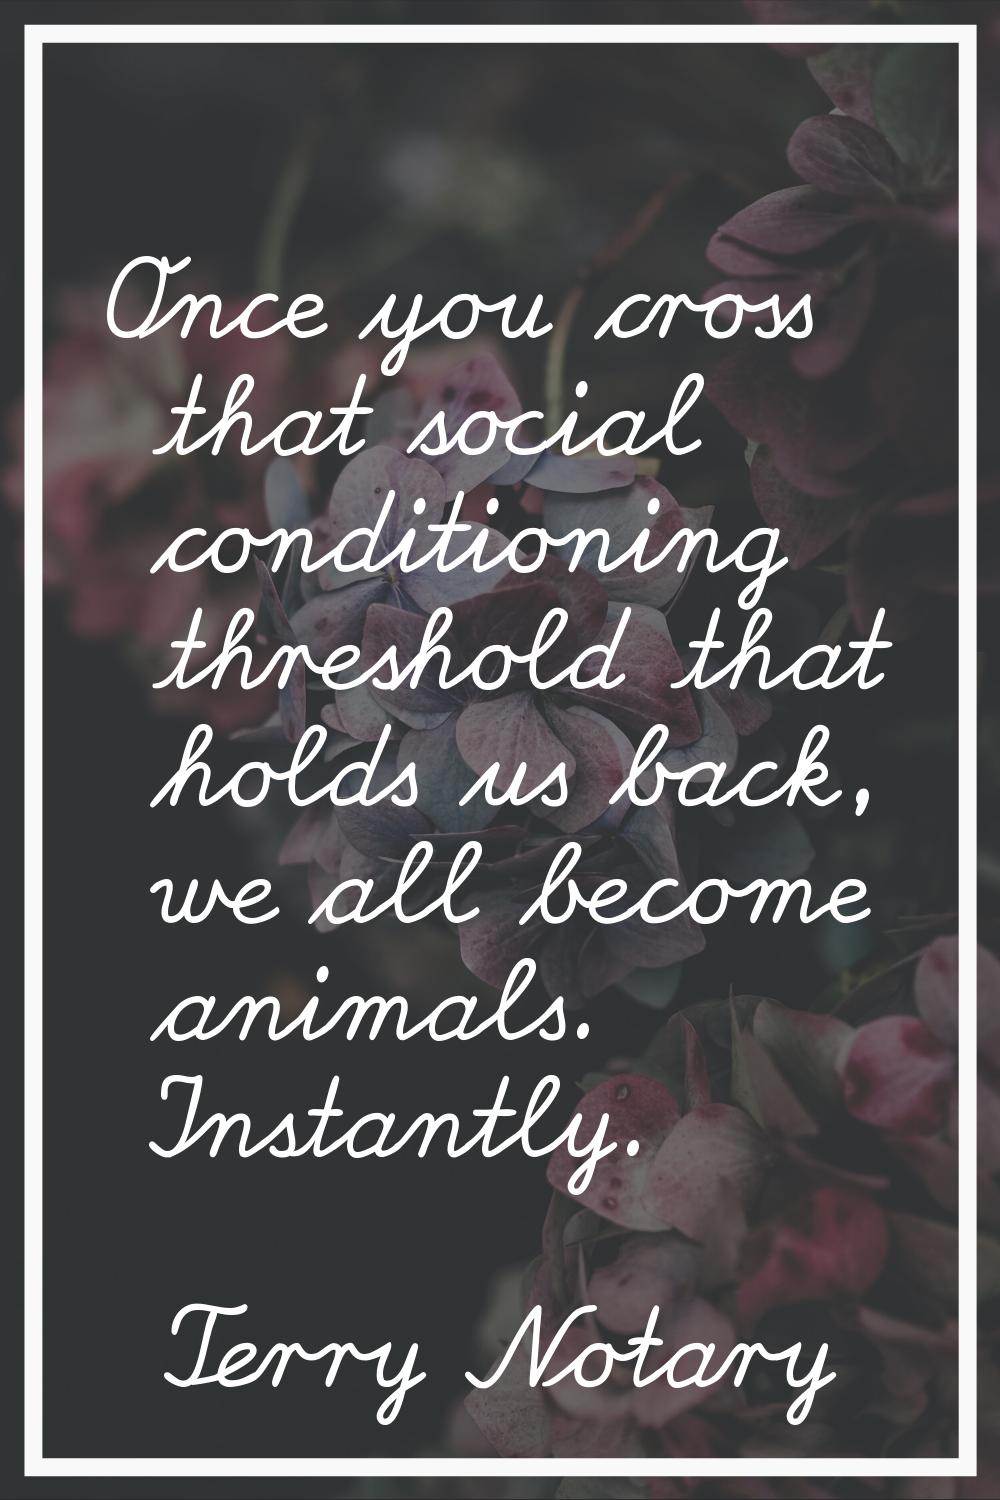 Once you cross that social conditioning threshold that holds us back, we all become animals. Instan